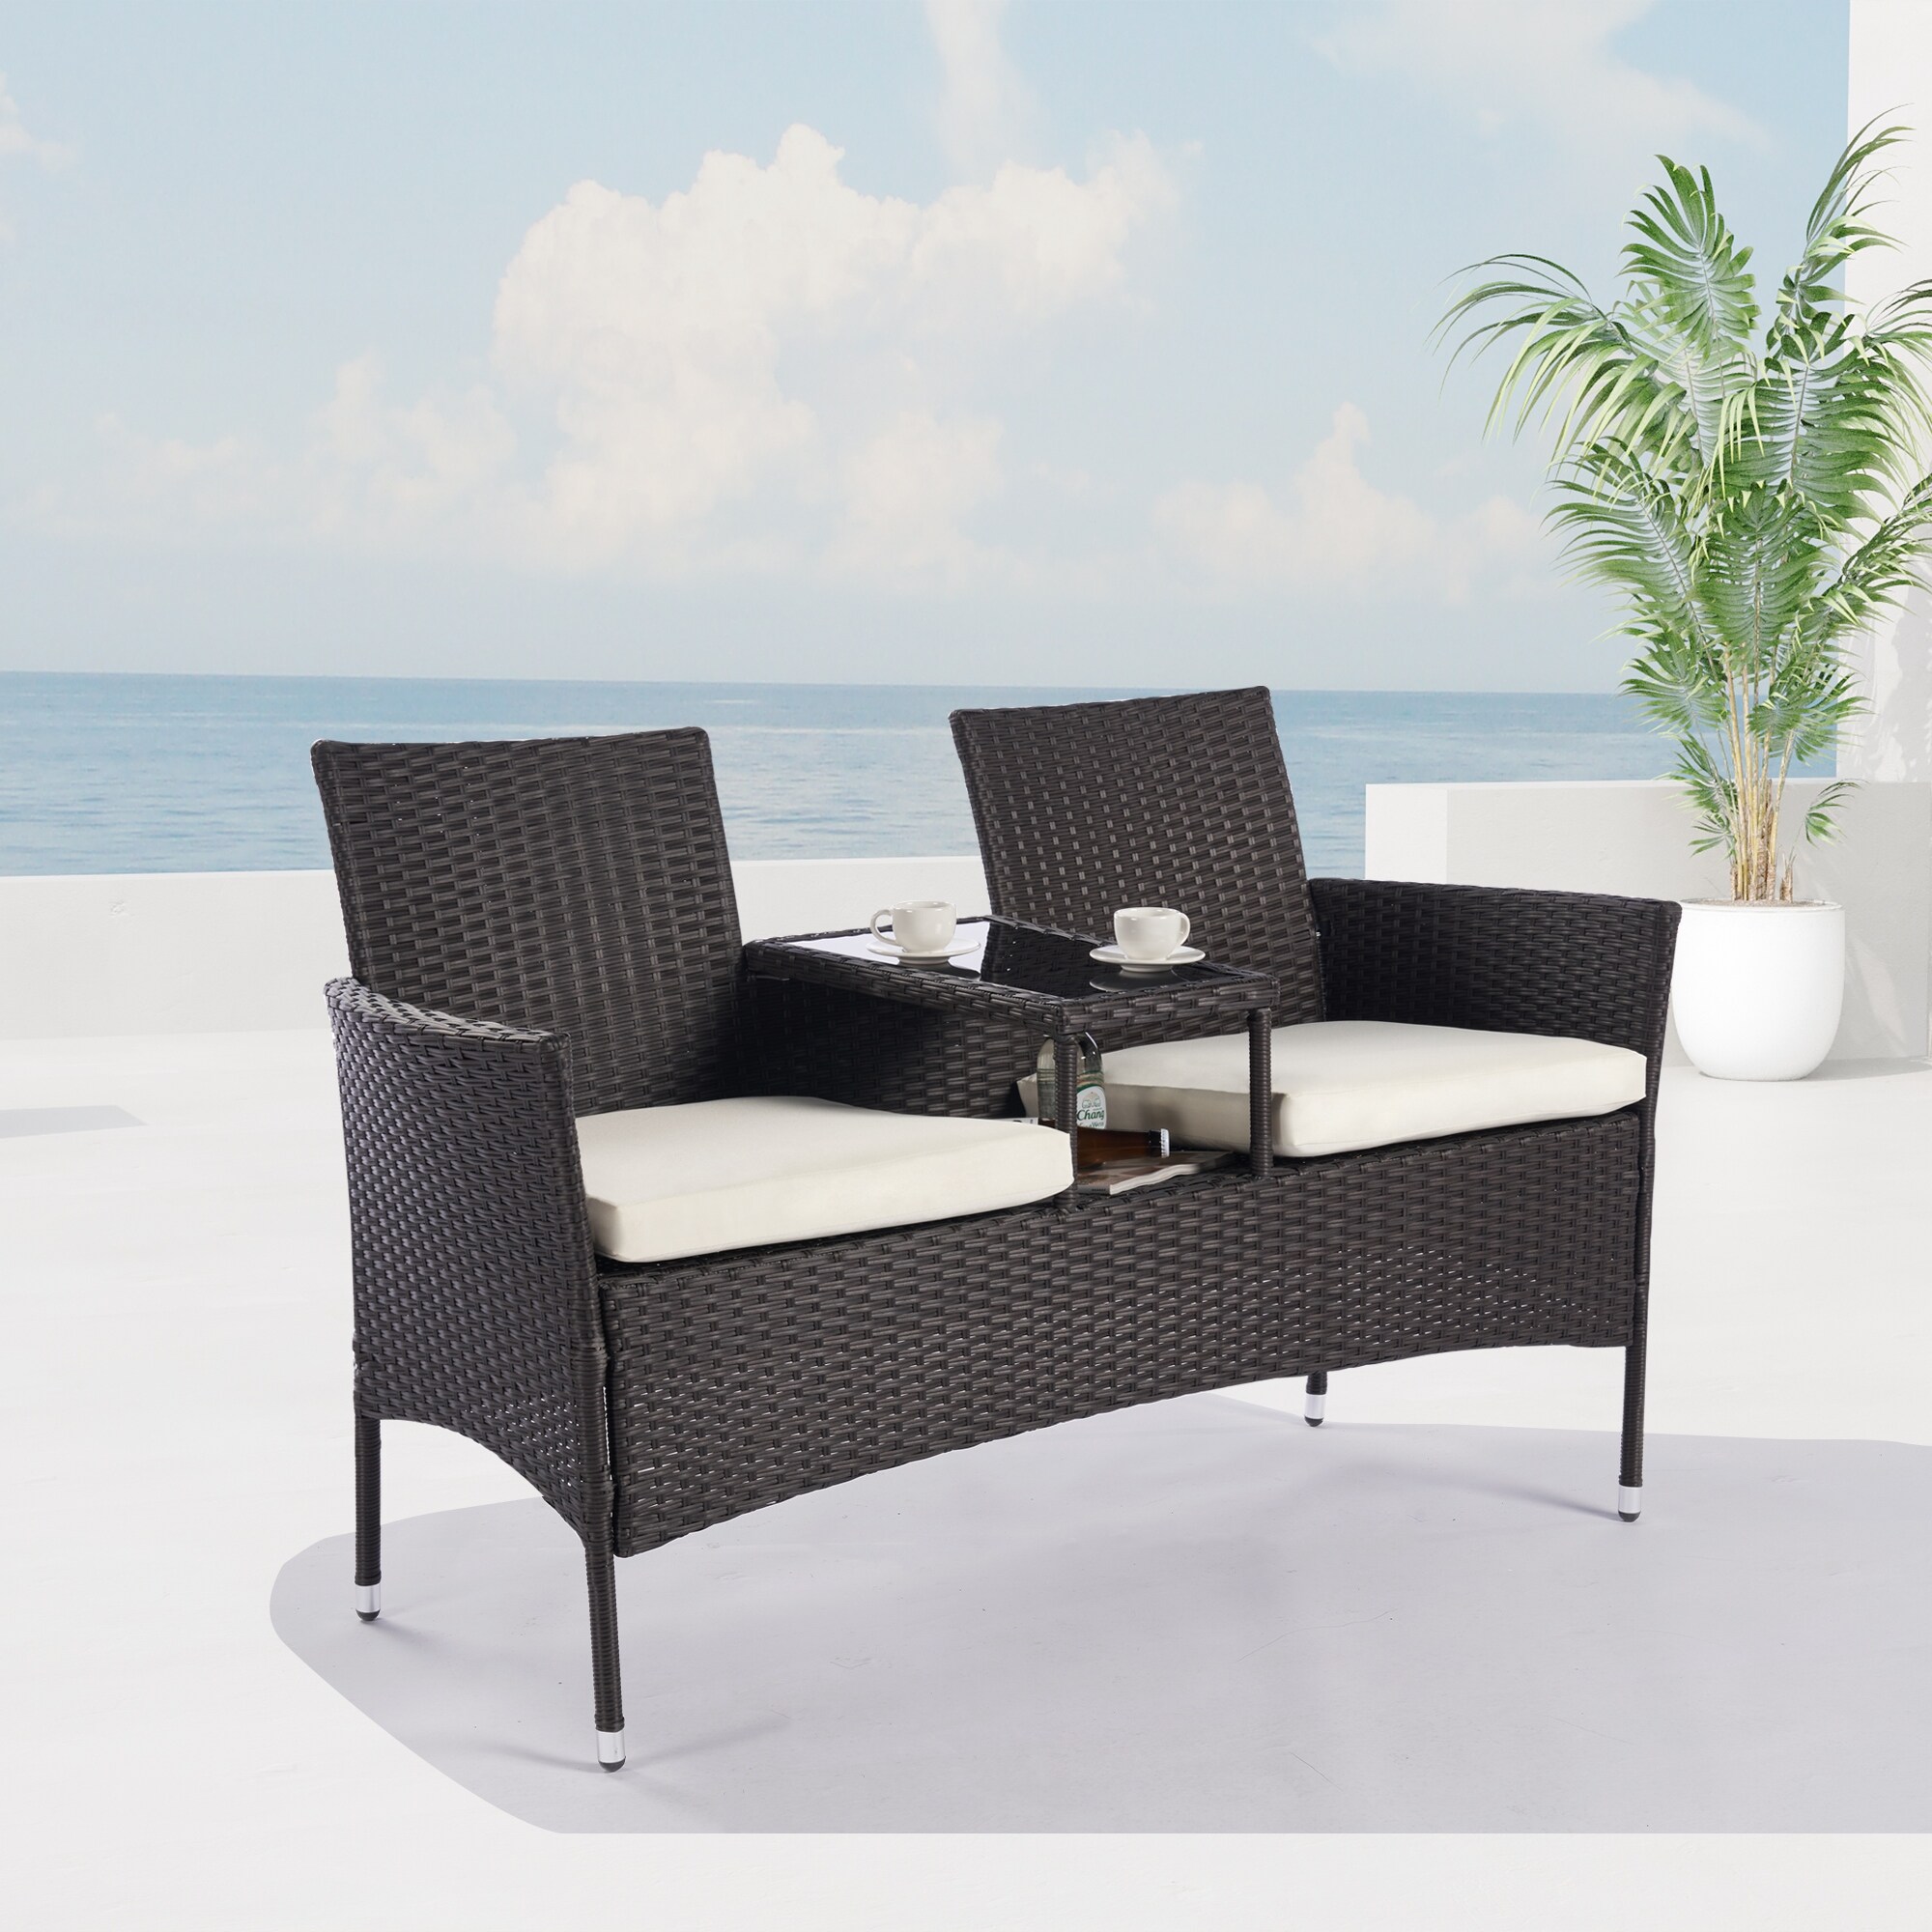 1-pieces Outdoor Patio Garden Furniture Set For 2  Pe Rattan Wicker Conversation Sofa Set With Cushions and Tempered Glass Table